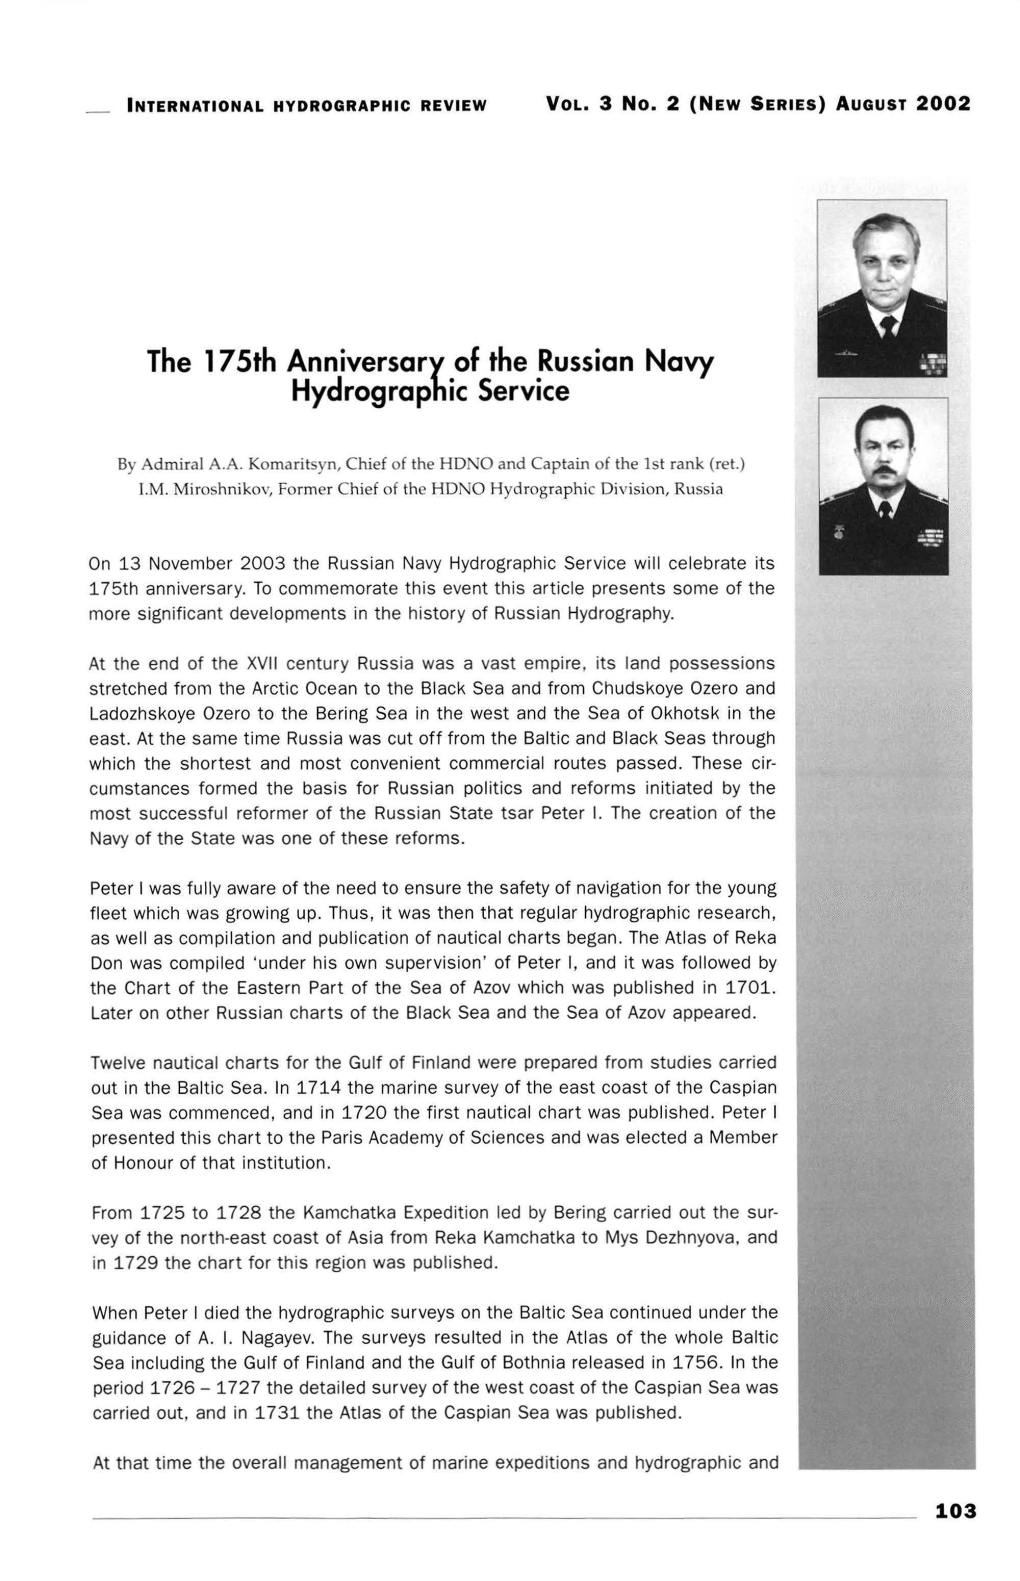 The 175Th Anniversary of the Russian Navy Hydrographic Service